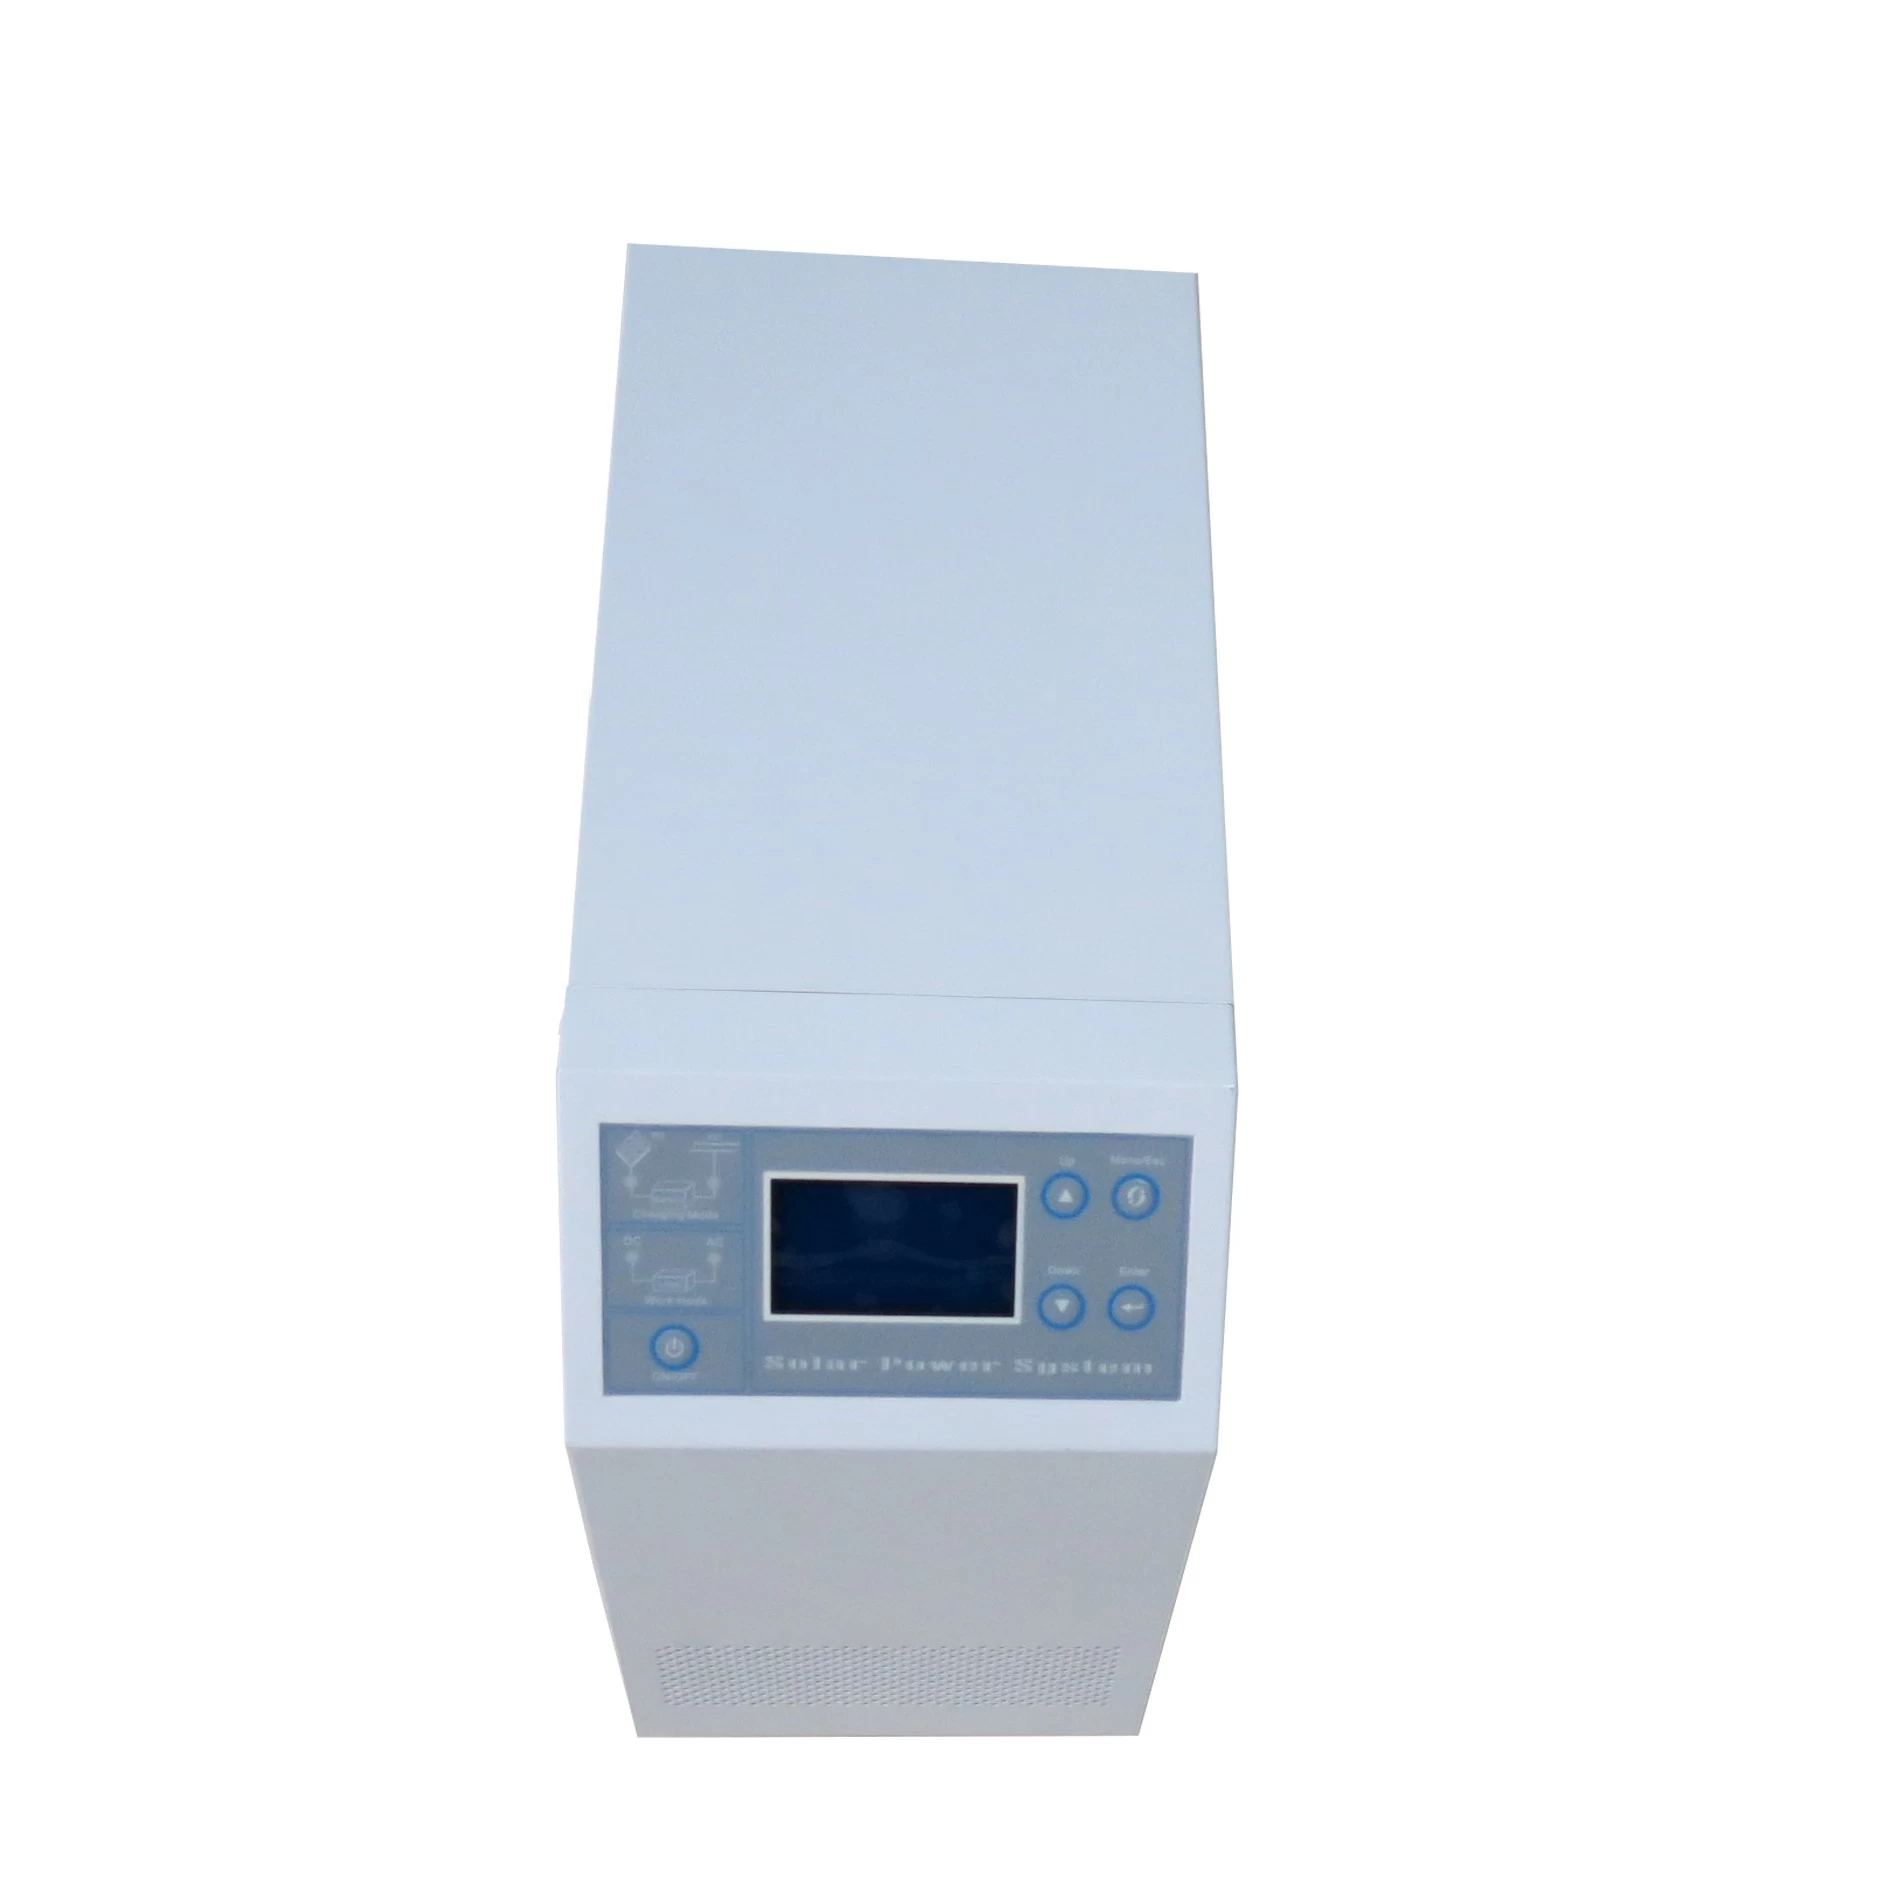 Factory price 24v 1000w hybrid solar inverter with mppt charge controller